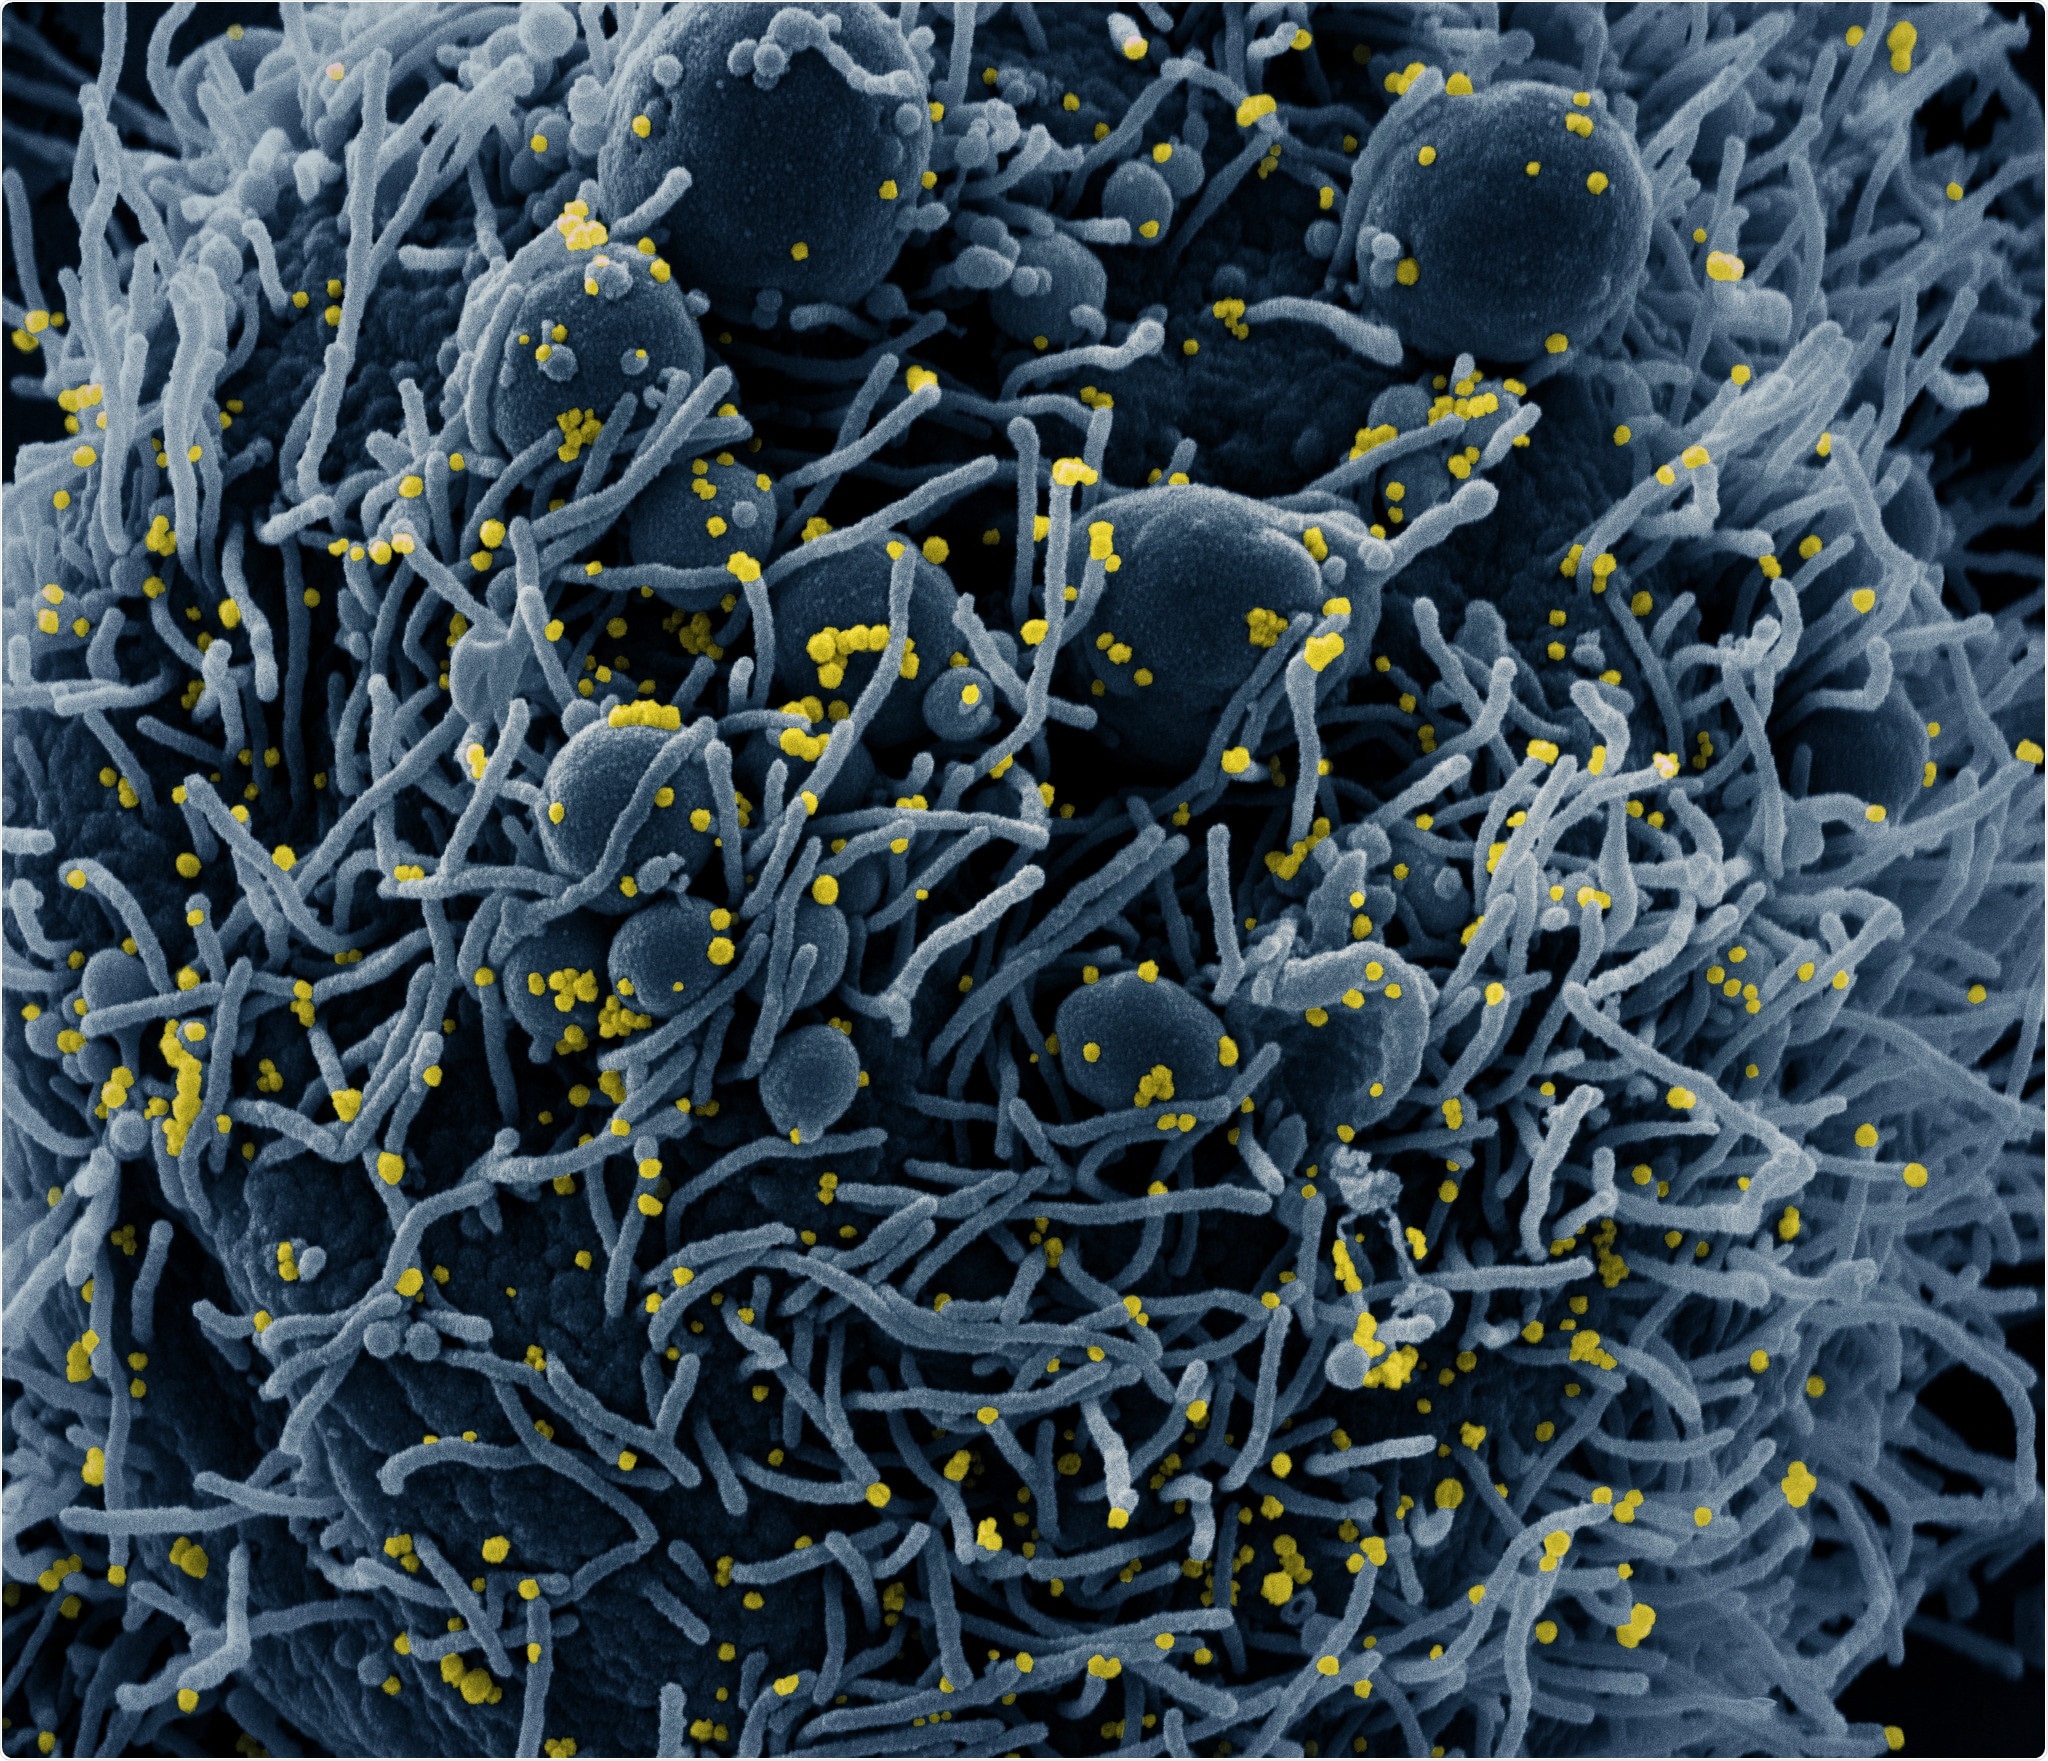 Novel Coronavirus SARS-CoV-2 Colorized scanning electron micrograph of an apoptotic cell (blue) infected with SARS-COV-2 virus particles (yellow), isolated from a patient sample. Image captured at the NIAID Integrated Research Facility (IRF) in Fort Detrick, Maryland. Credit: NIAID